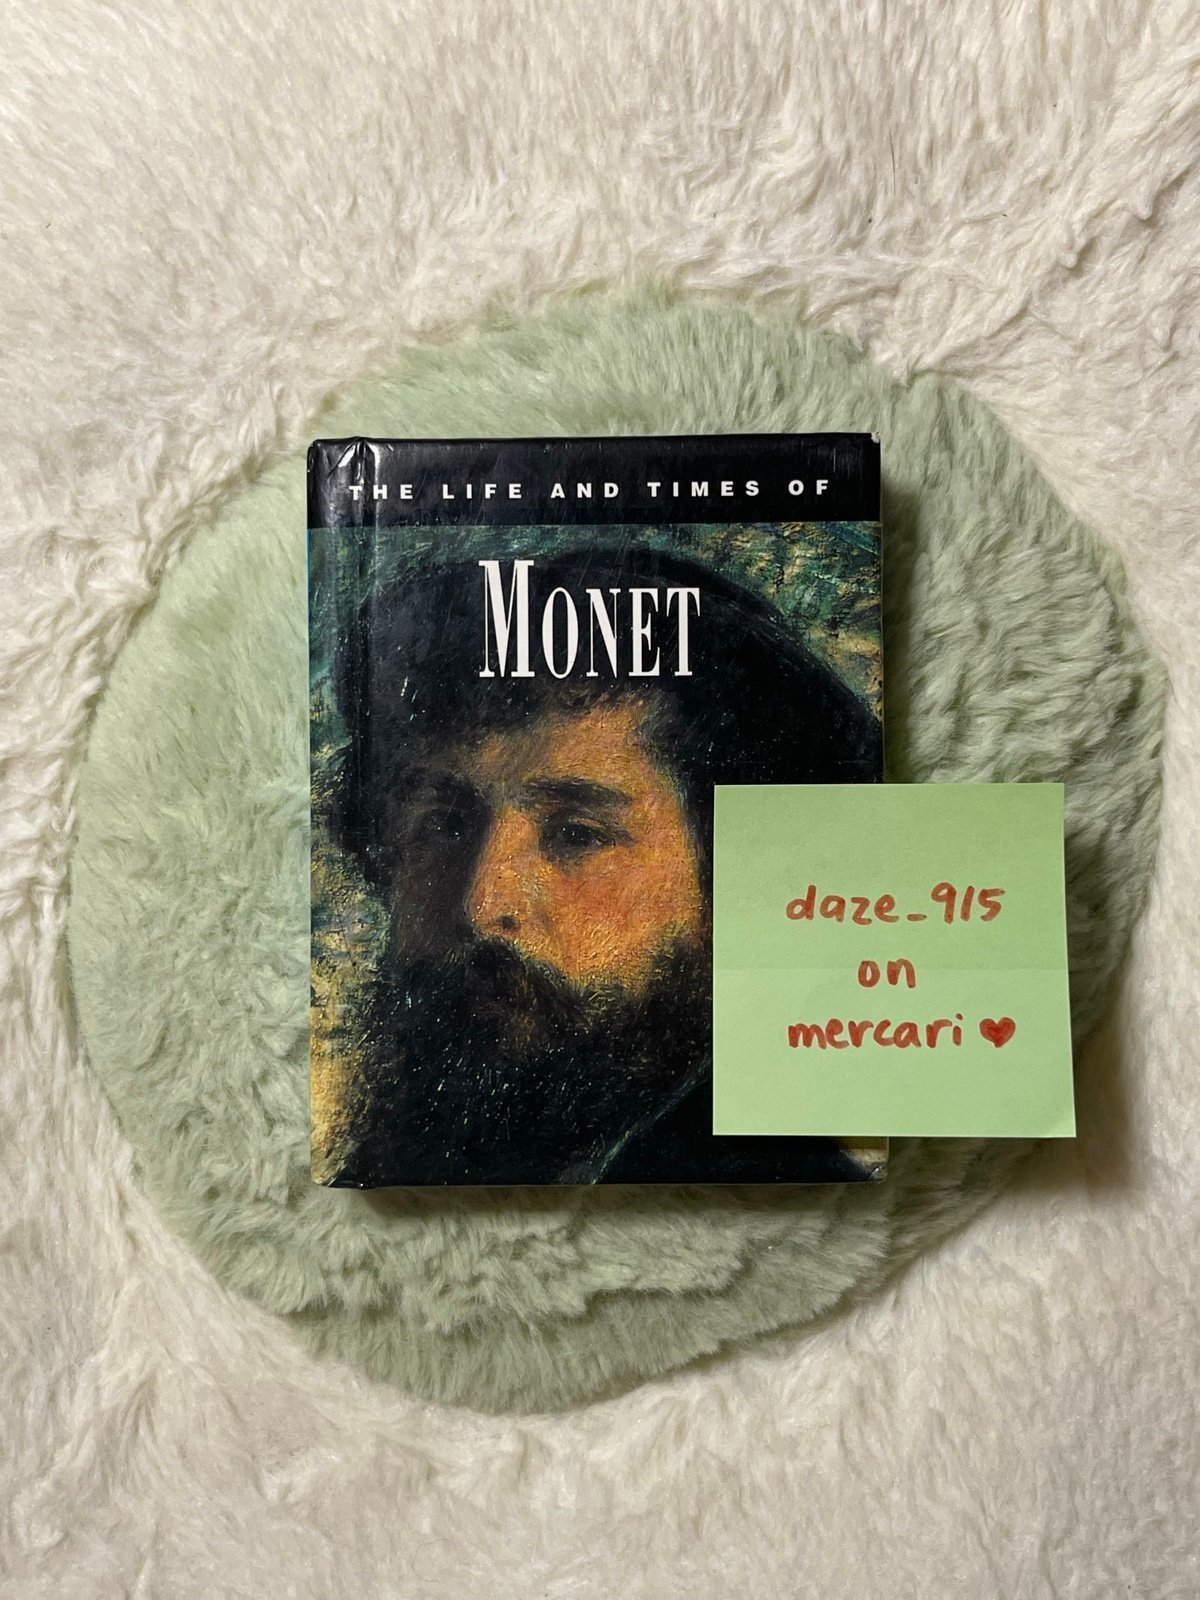 Vintage Mini Book: The Life and Times of Monet hLNpTMqVd